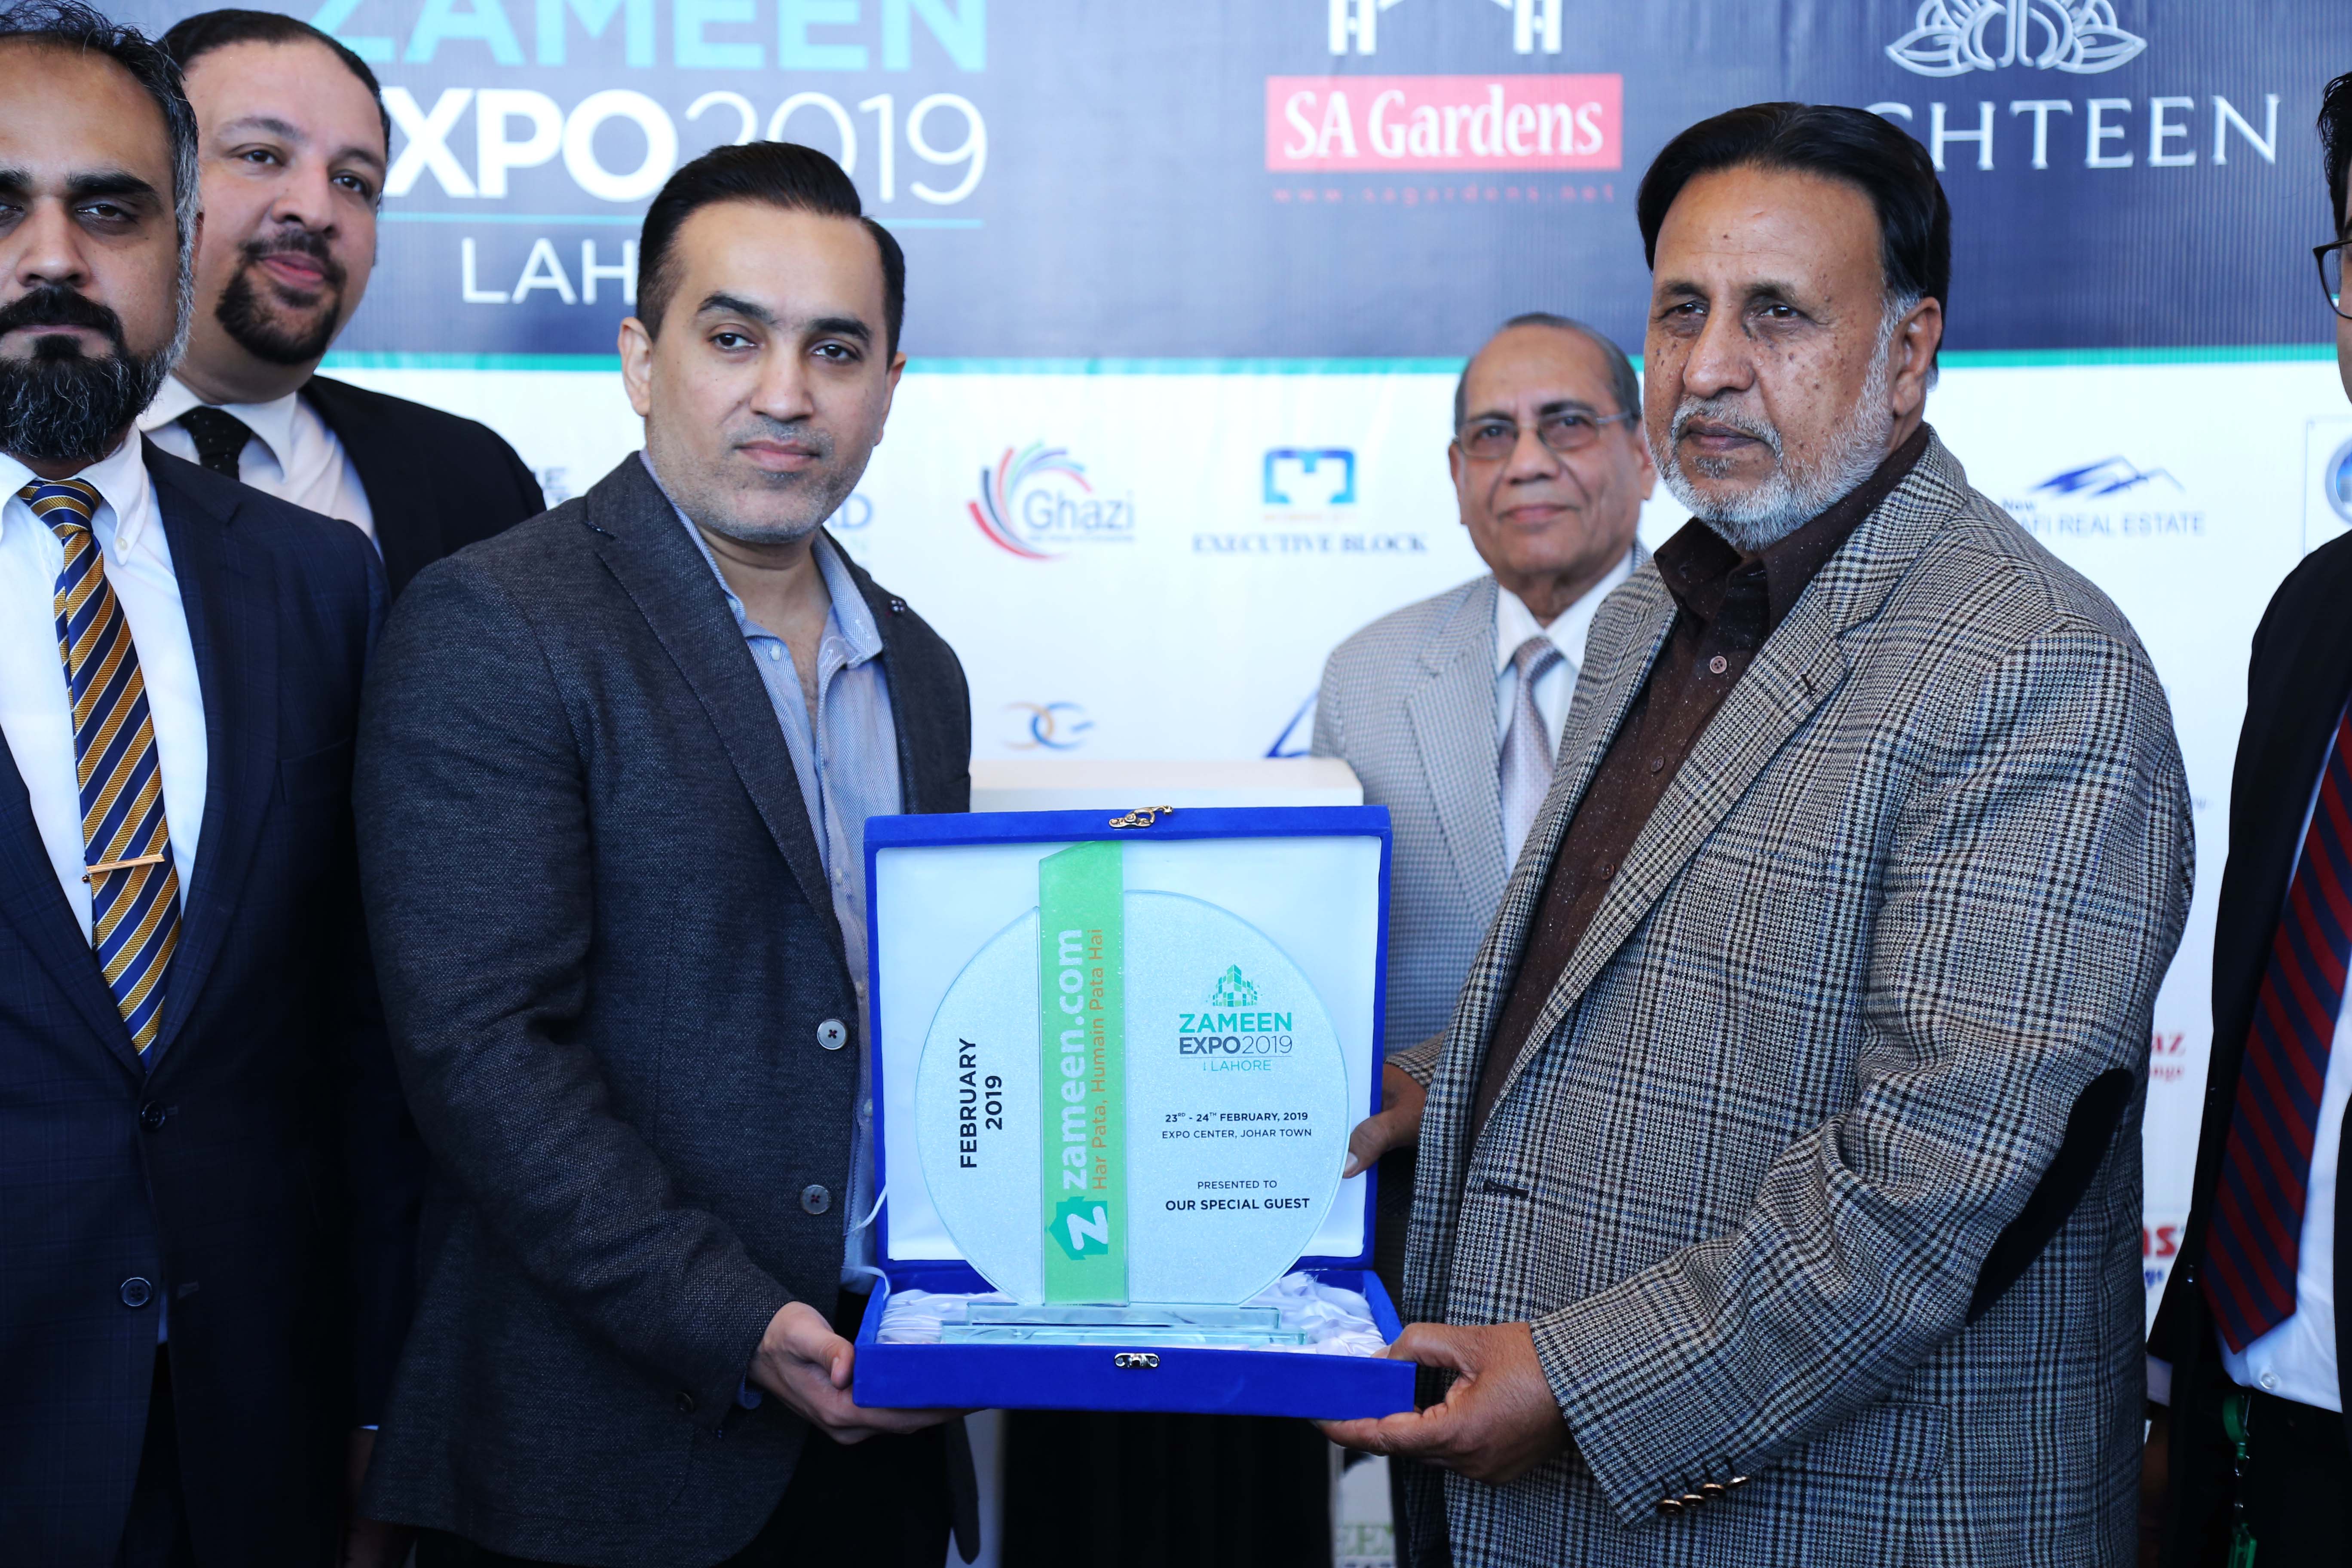 Zameen Expo 2019 – Lahore concludes successfully; Event introduces technological advancements to the real estate sector